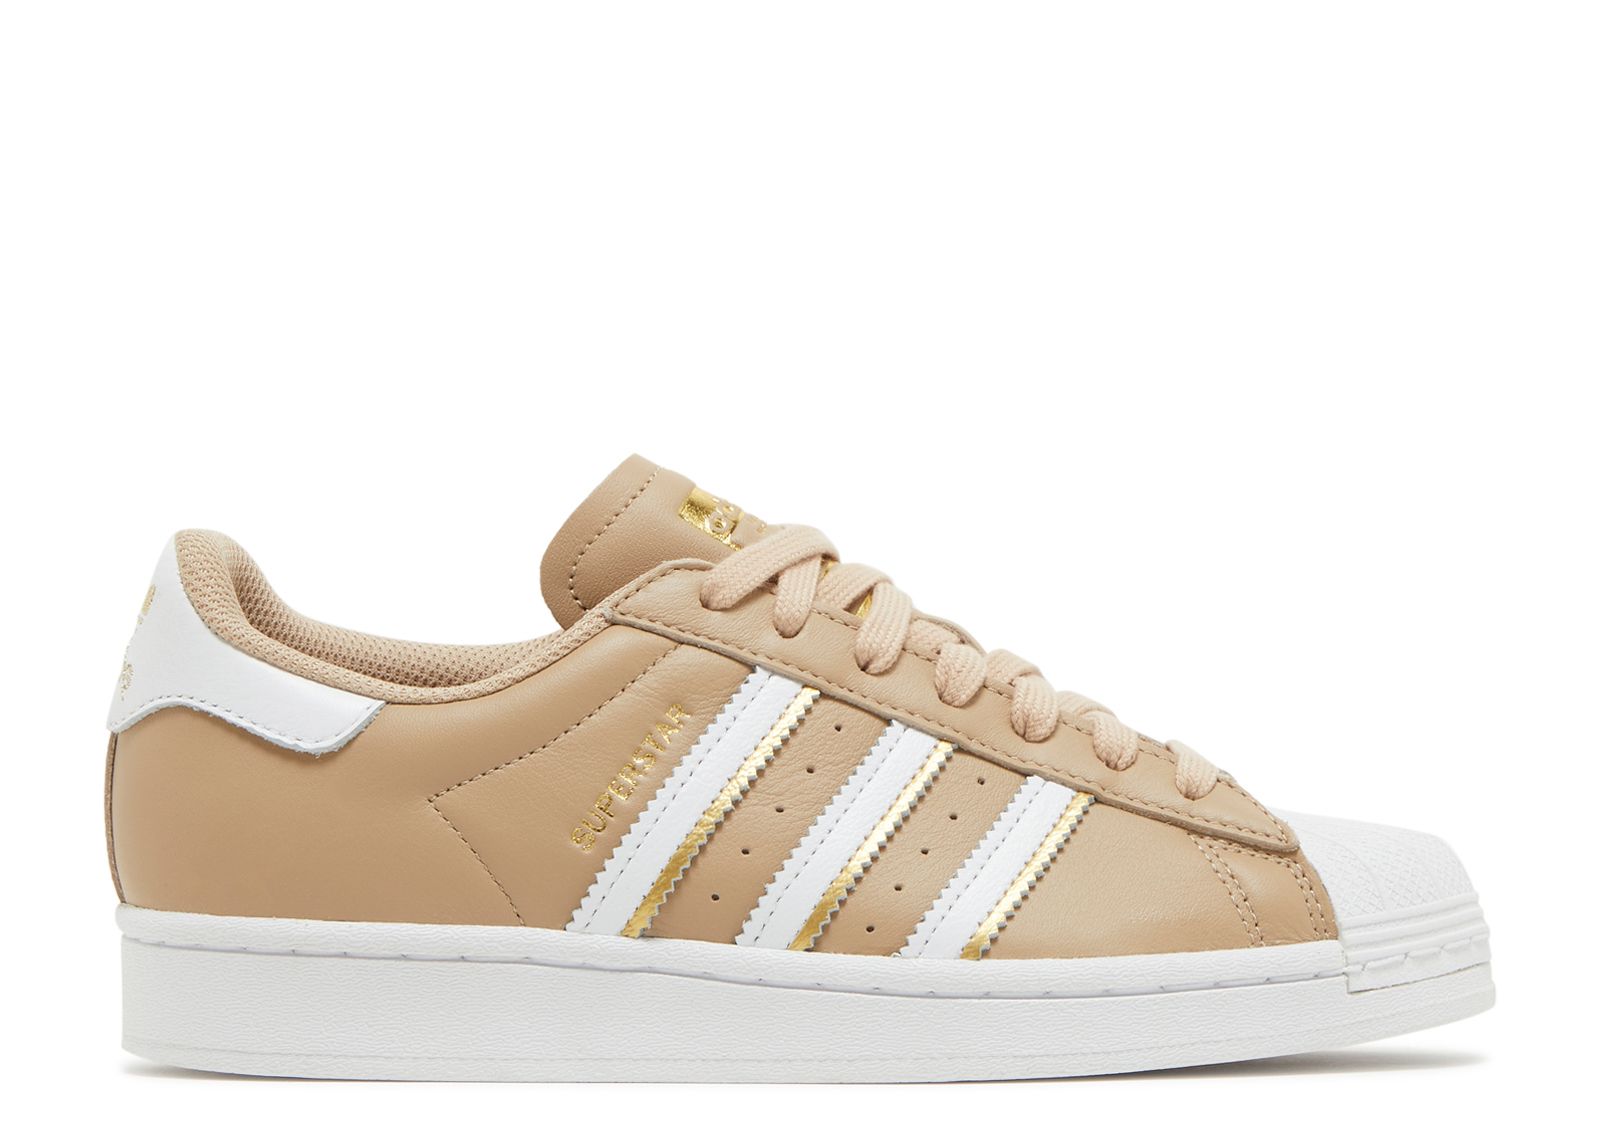 Wmns Superstar 'Pale Nude' - Adidas - GZ3454 - cloud white/pale nude ...